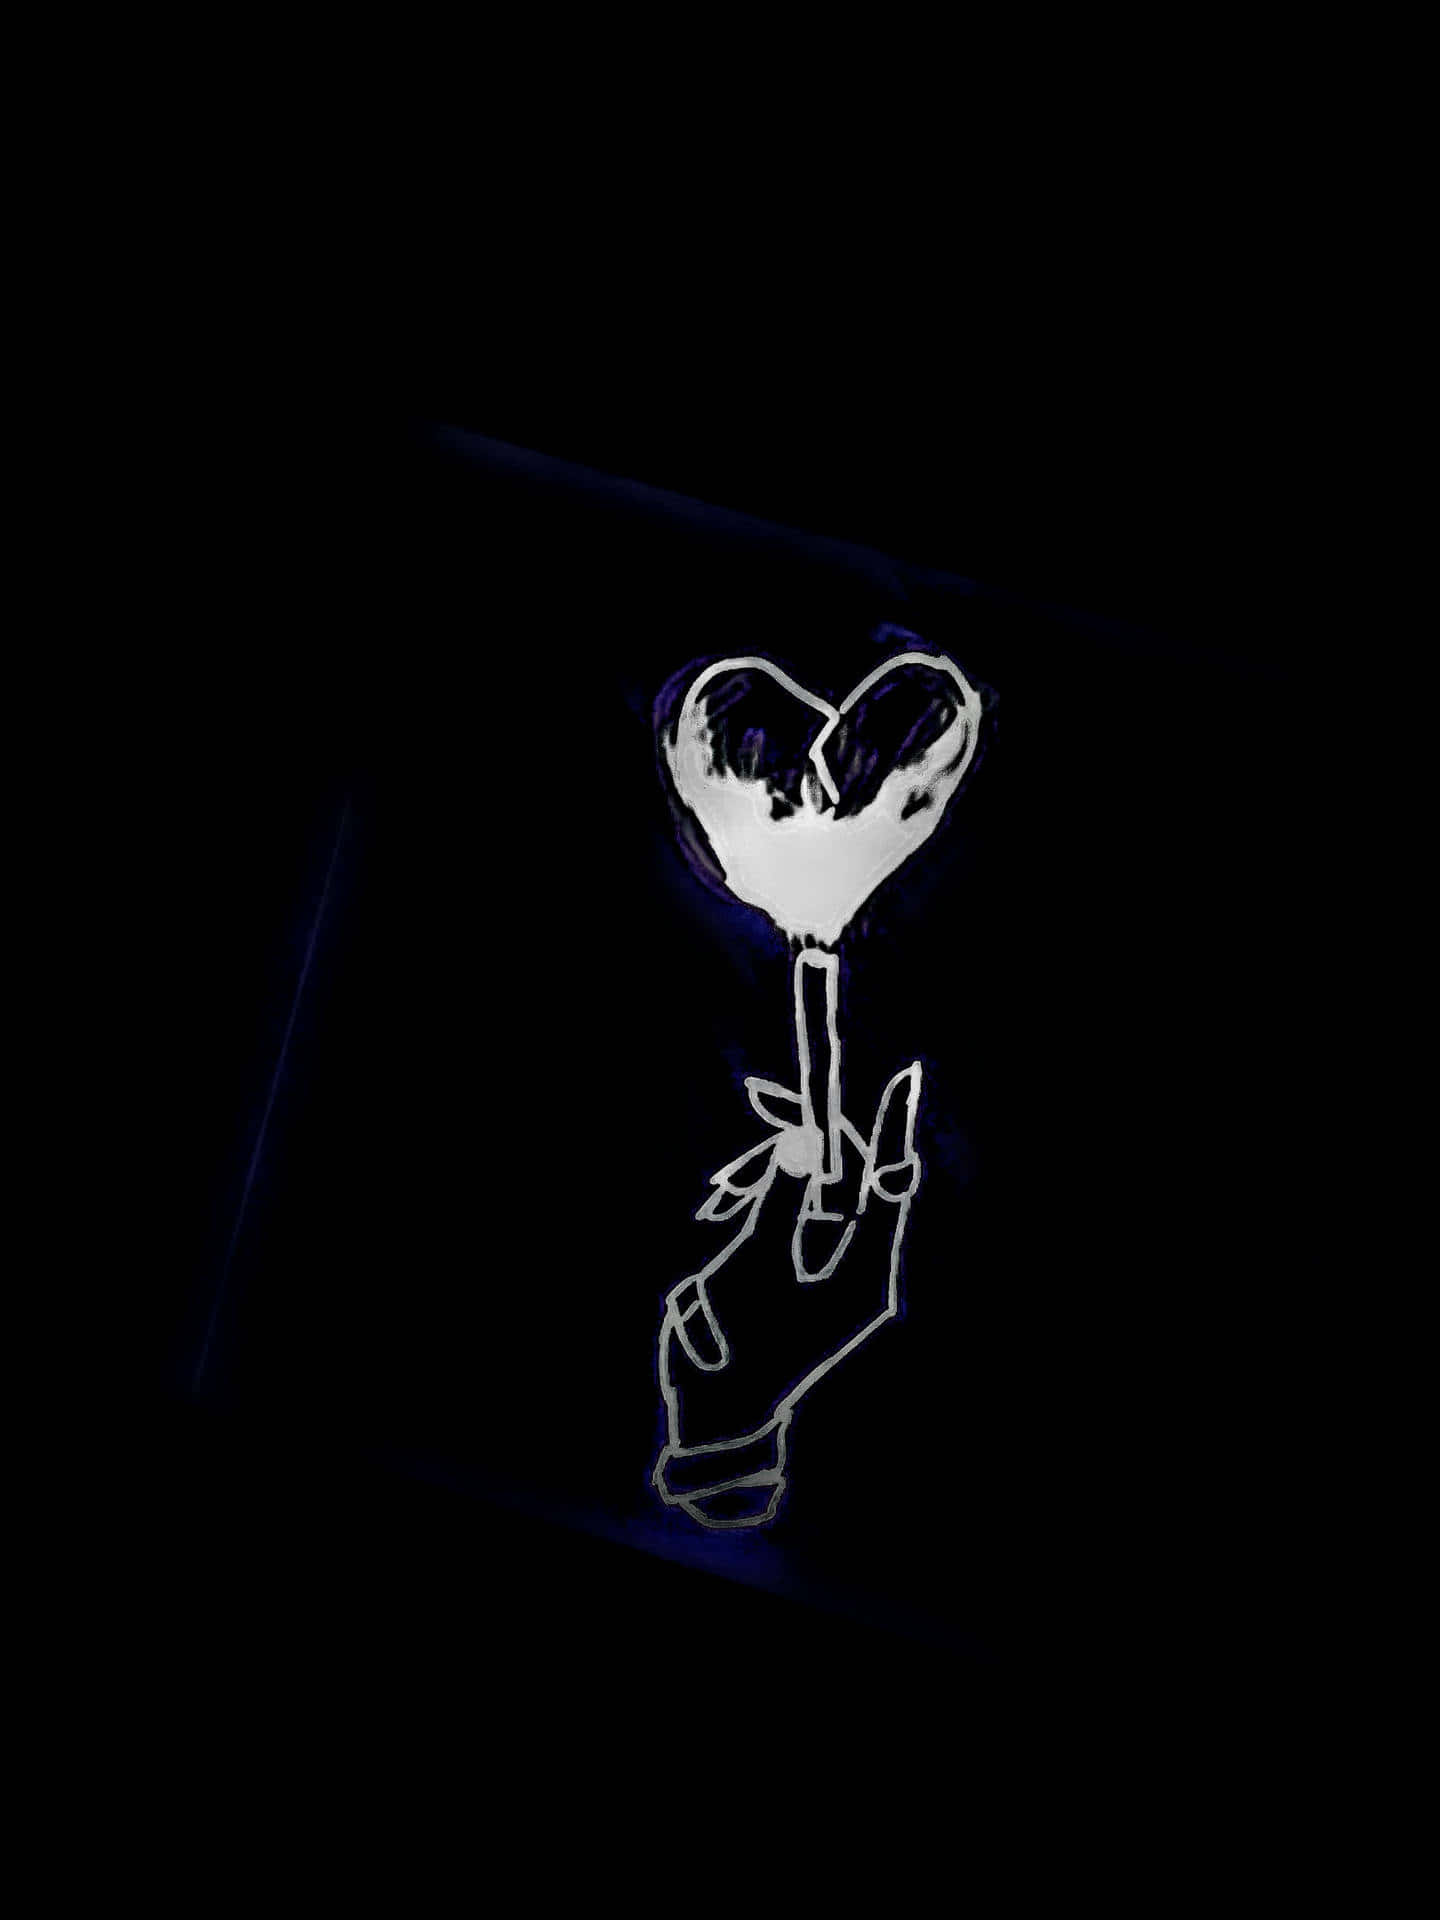 A Hand Holding A Heart In The Dark